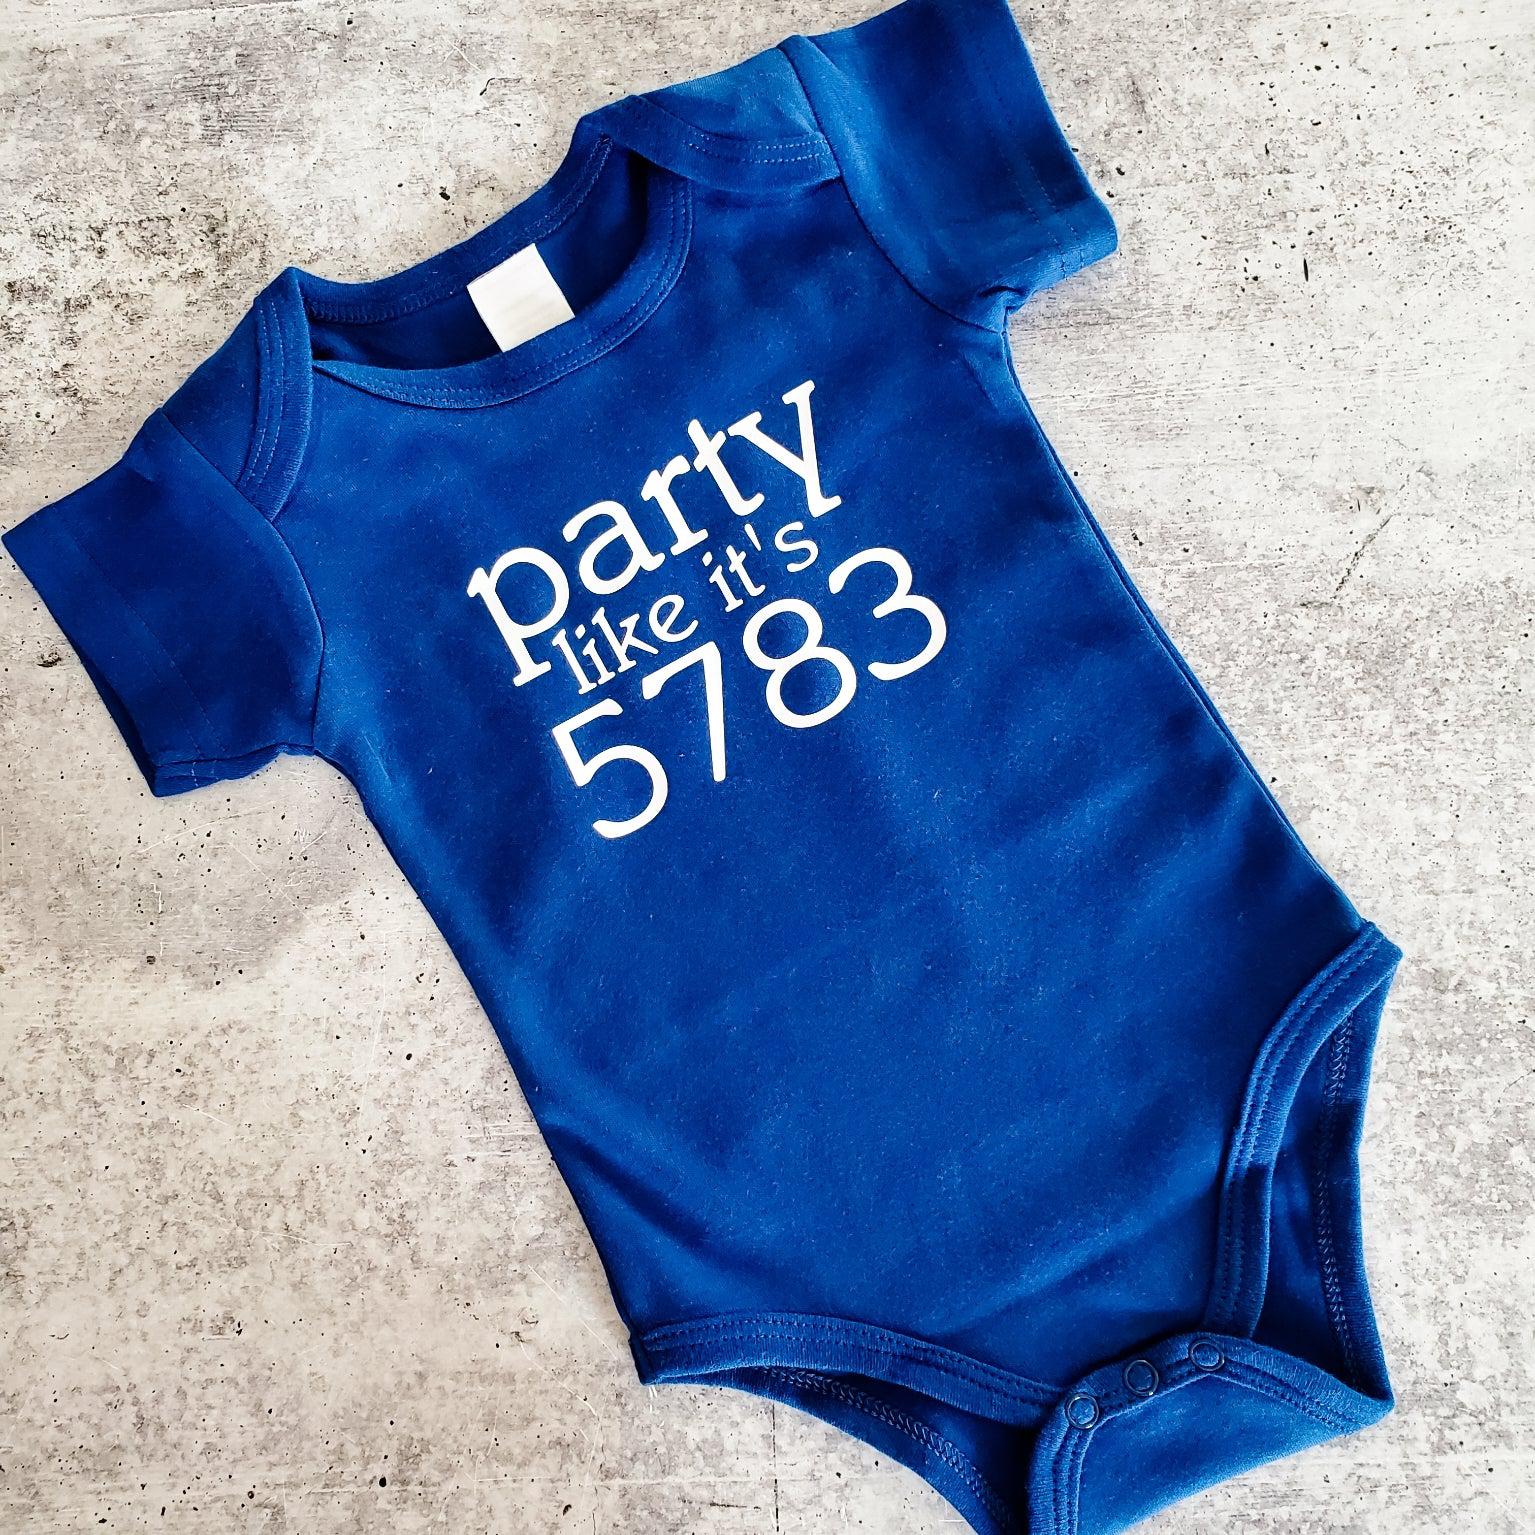 PARTY LIKE IT'S 5783 Baby Outfit and Toddler Tee Salt and Sparkle